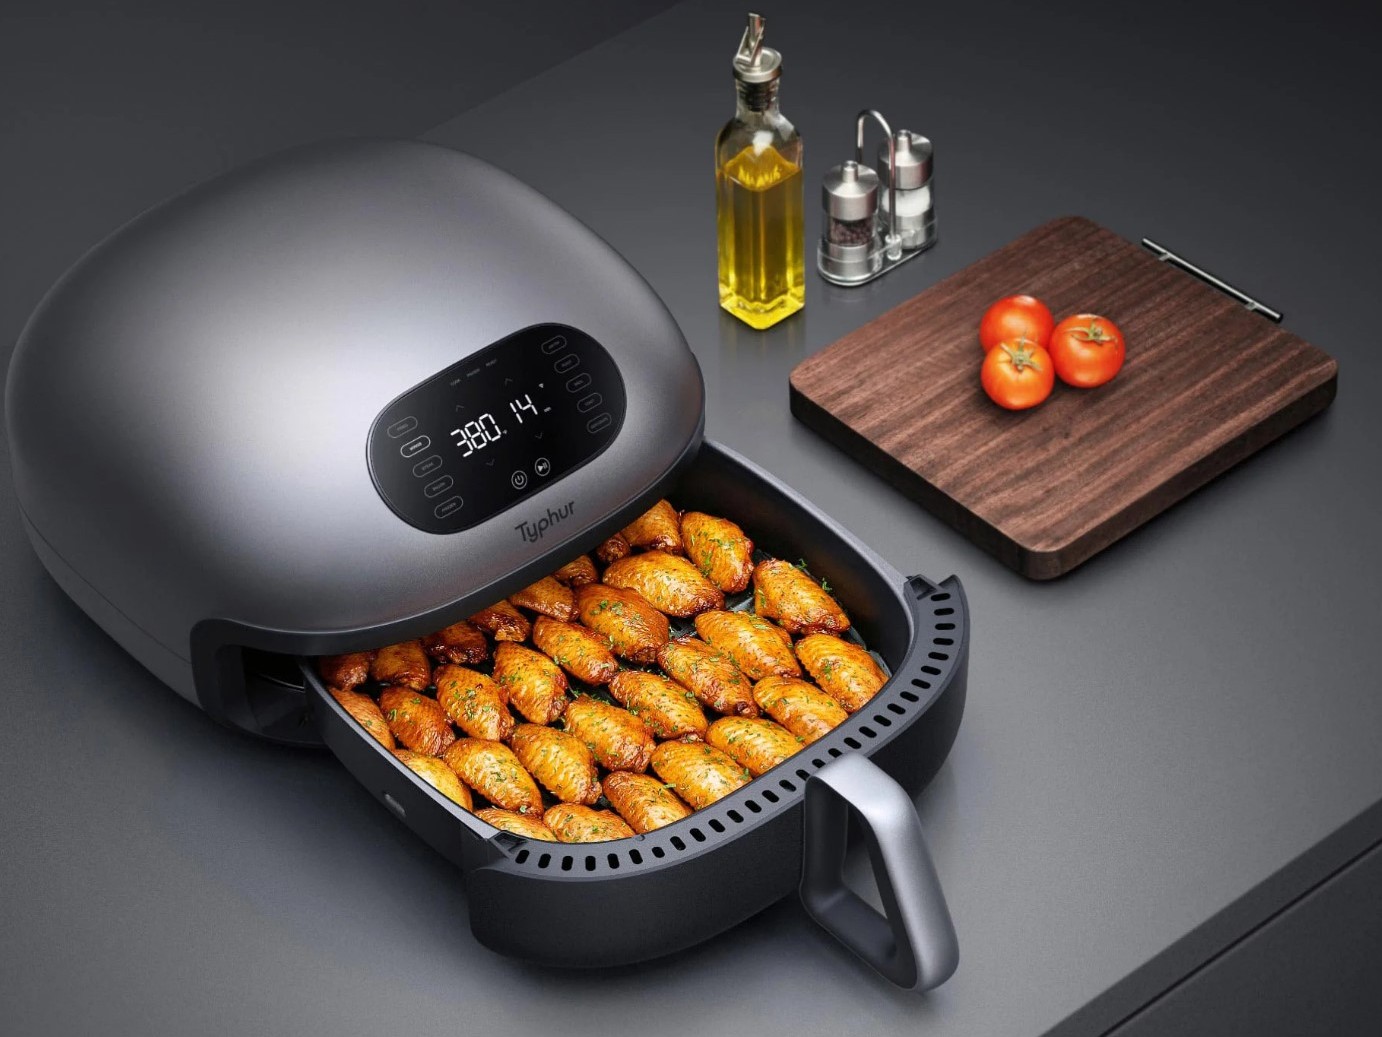 Typhur Dome AirFryer loaded with chicken wings